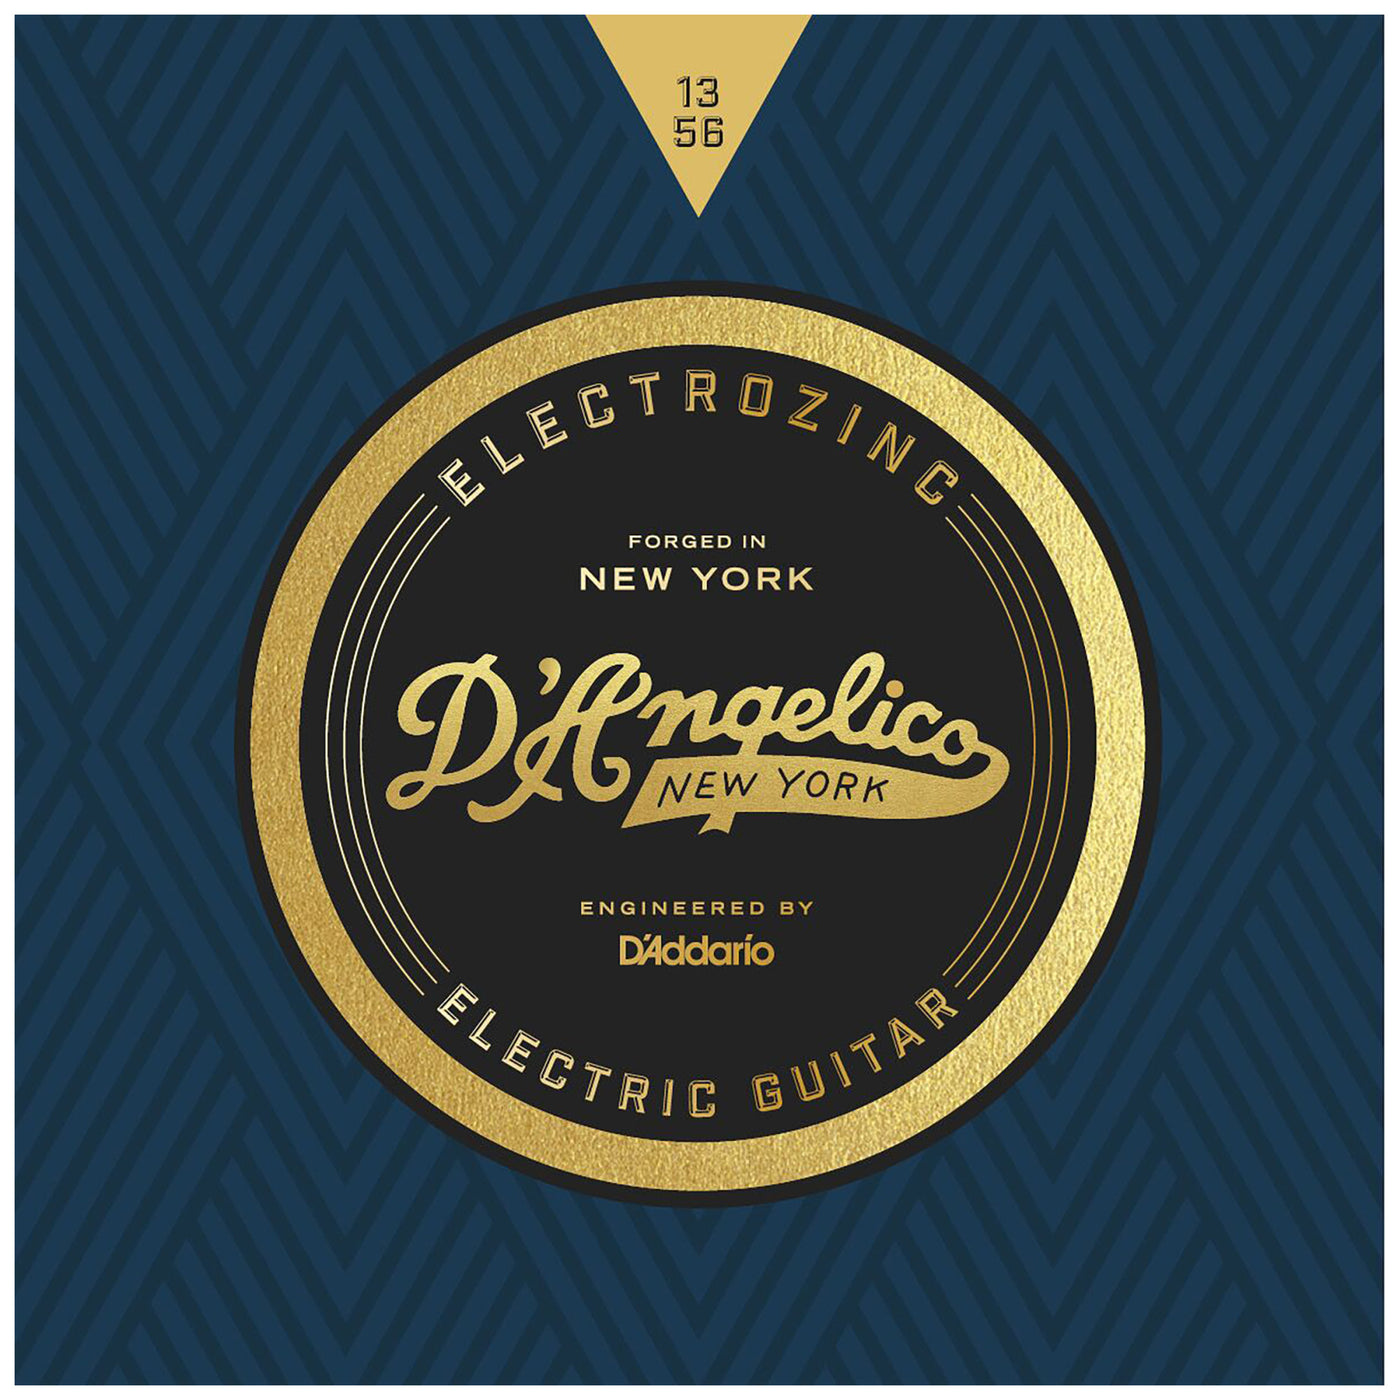 D'Angelico Electrozinc Strings Guitar Strings